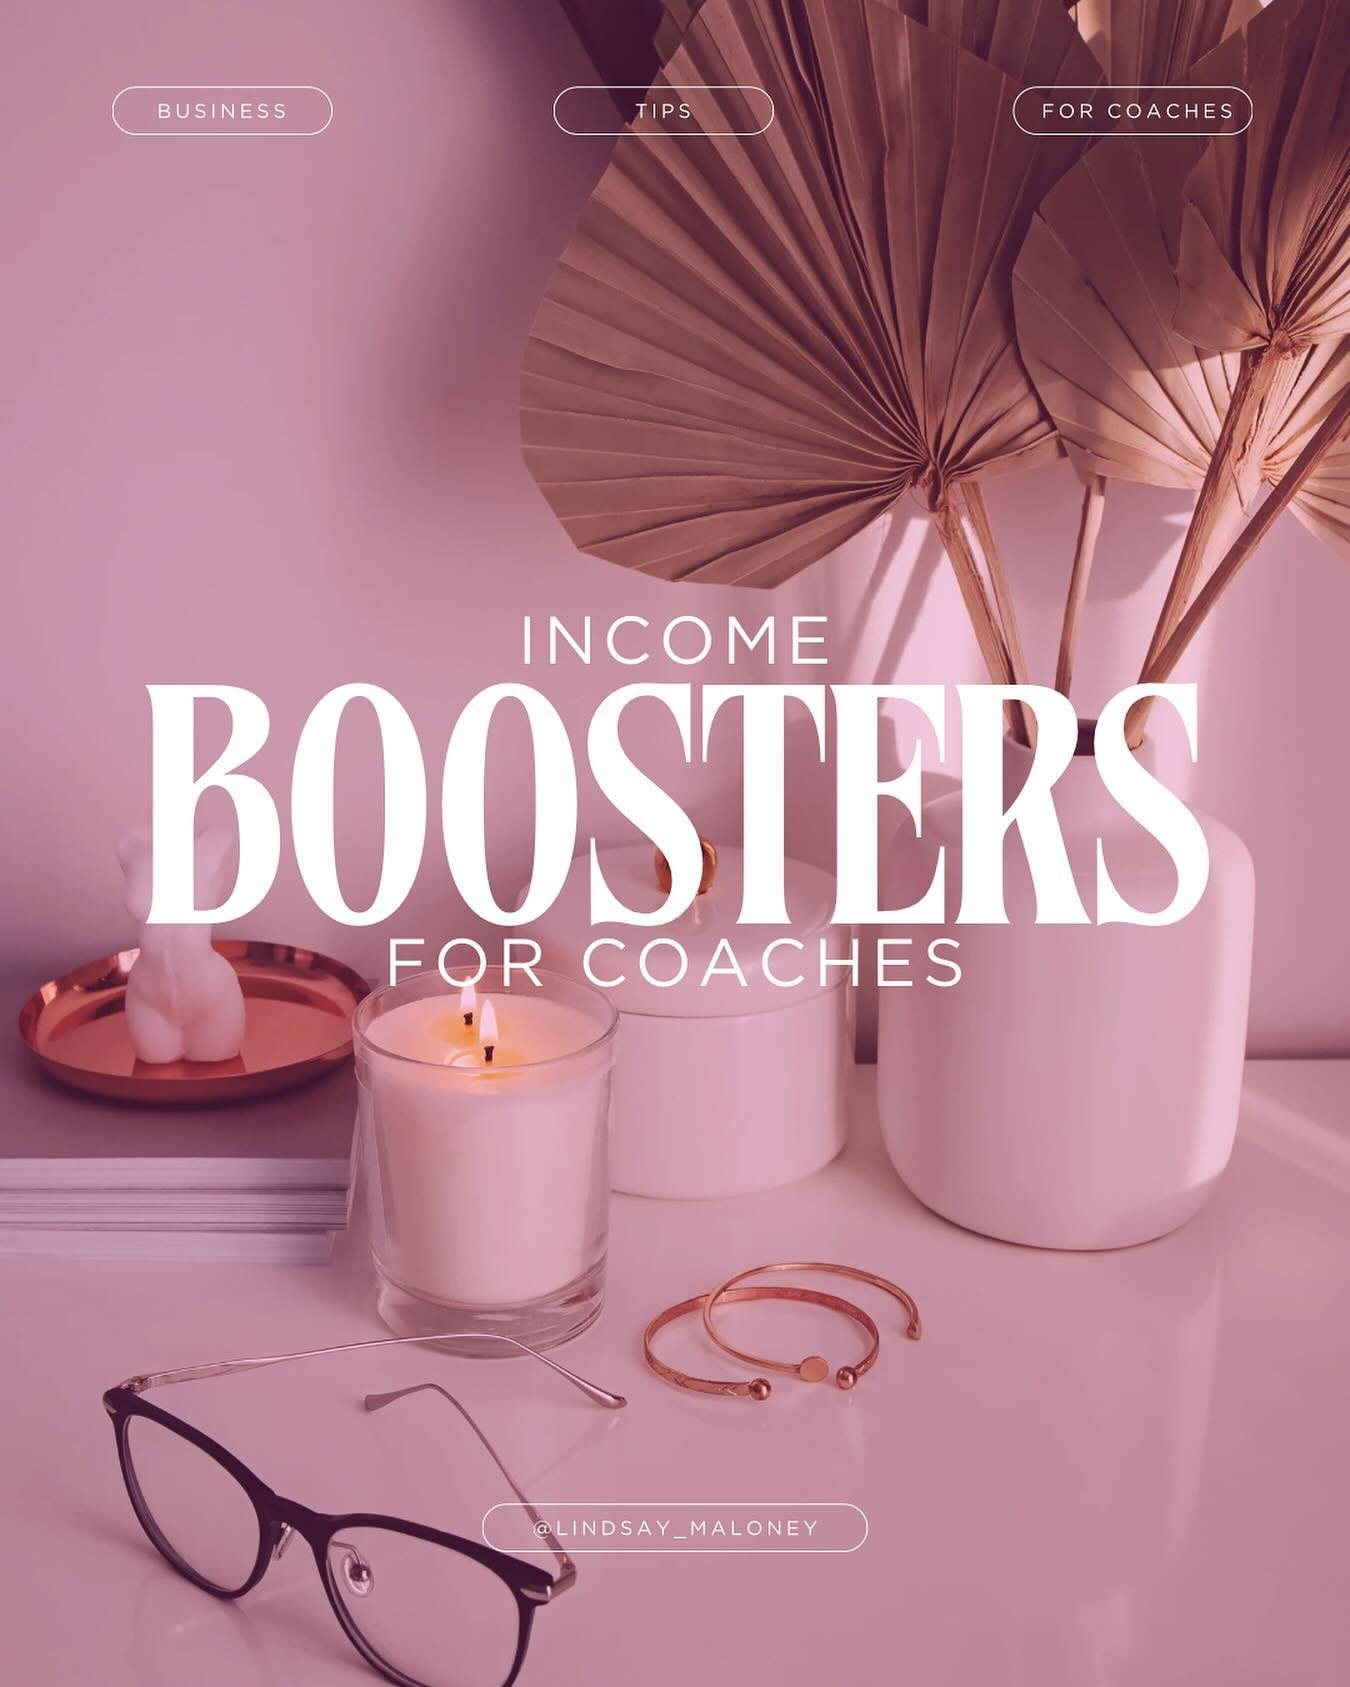 🚀🚀🚀 Income boosters for coaches.

1️⃣ Pre-sell something you&rsquo;ve been working on or something you plan on launching. 

2️⃣ Sell pop-up intensive sessions.

3️⃣ Sell a product you already have. 

4️⃣ Create and sell a masterclass based on your